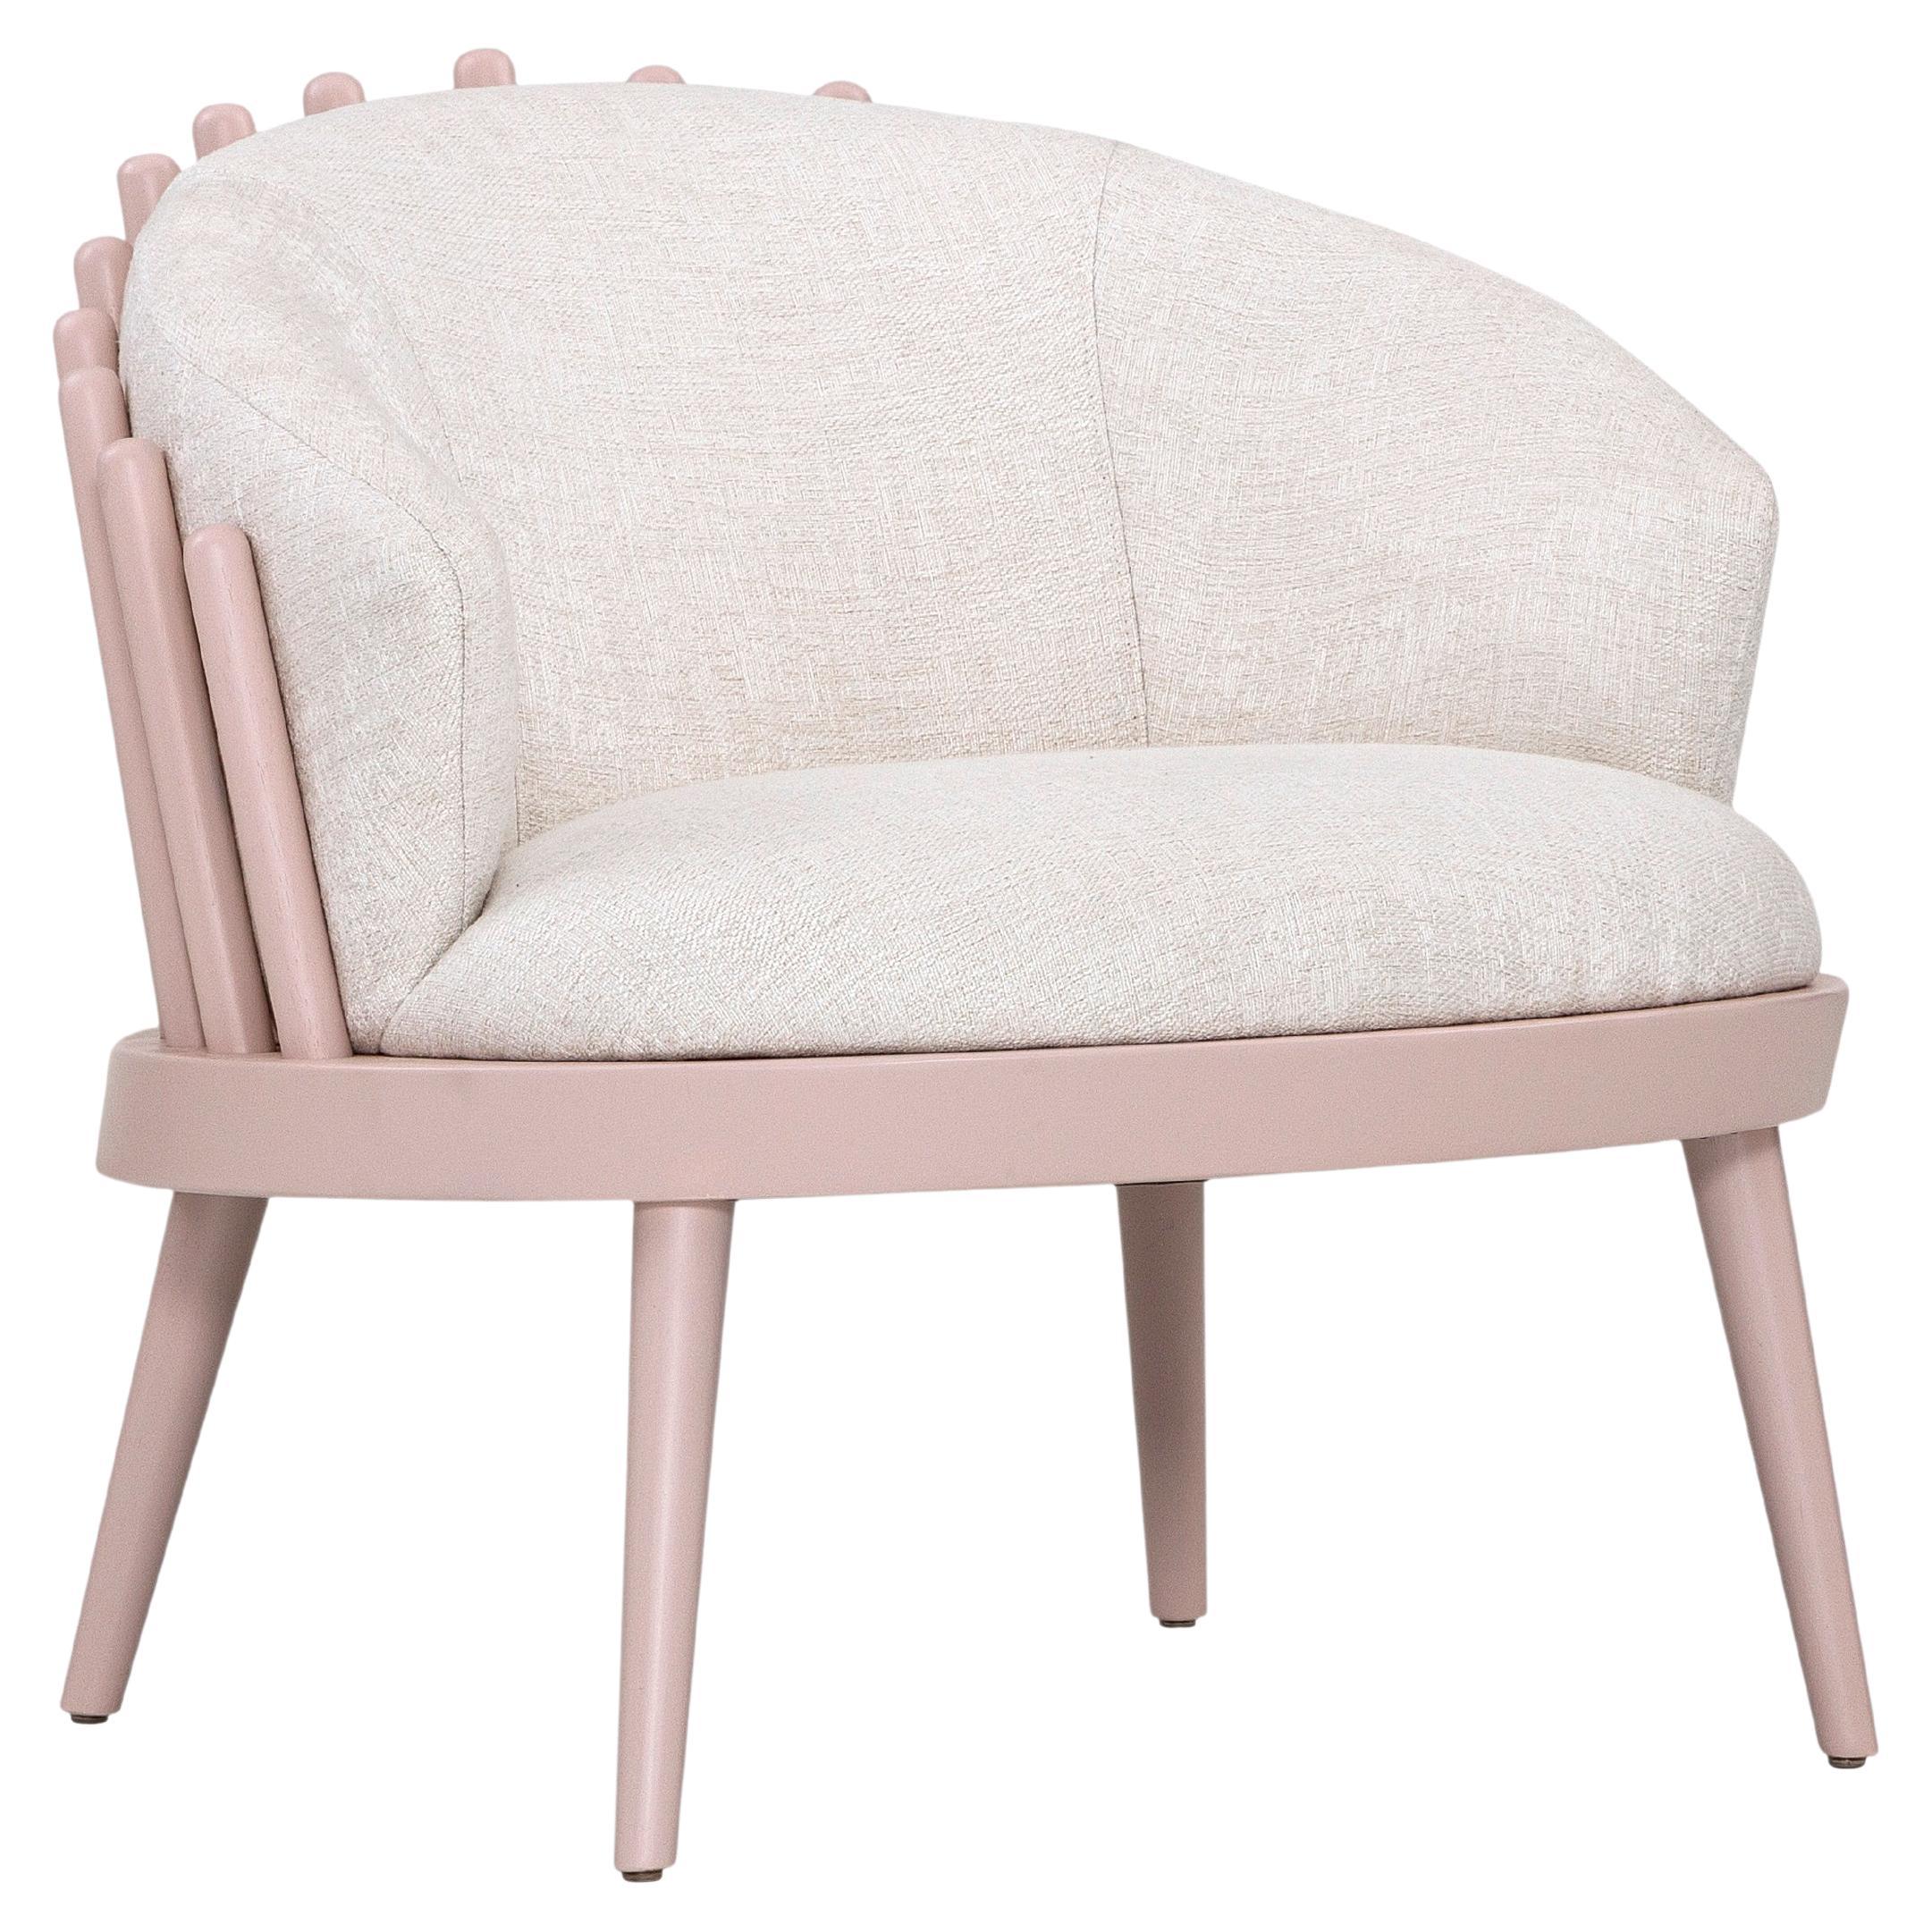 Fane Upholstered Armchair in Quartz Wood Finish and White Fabric For Sale